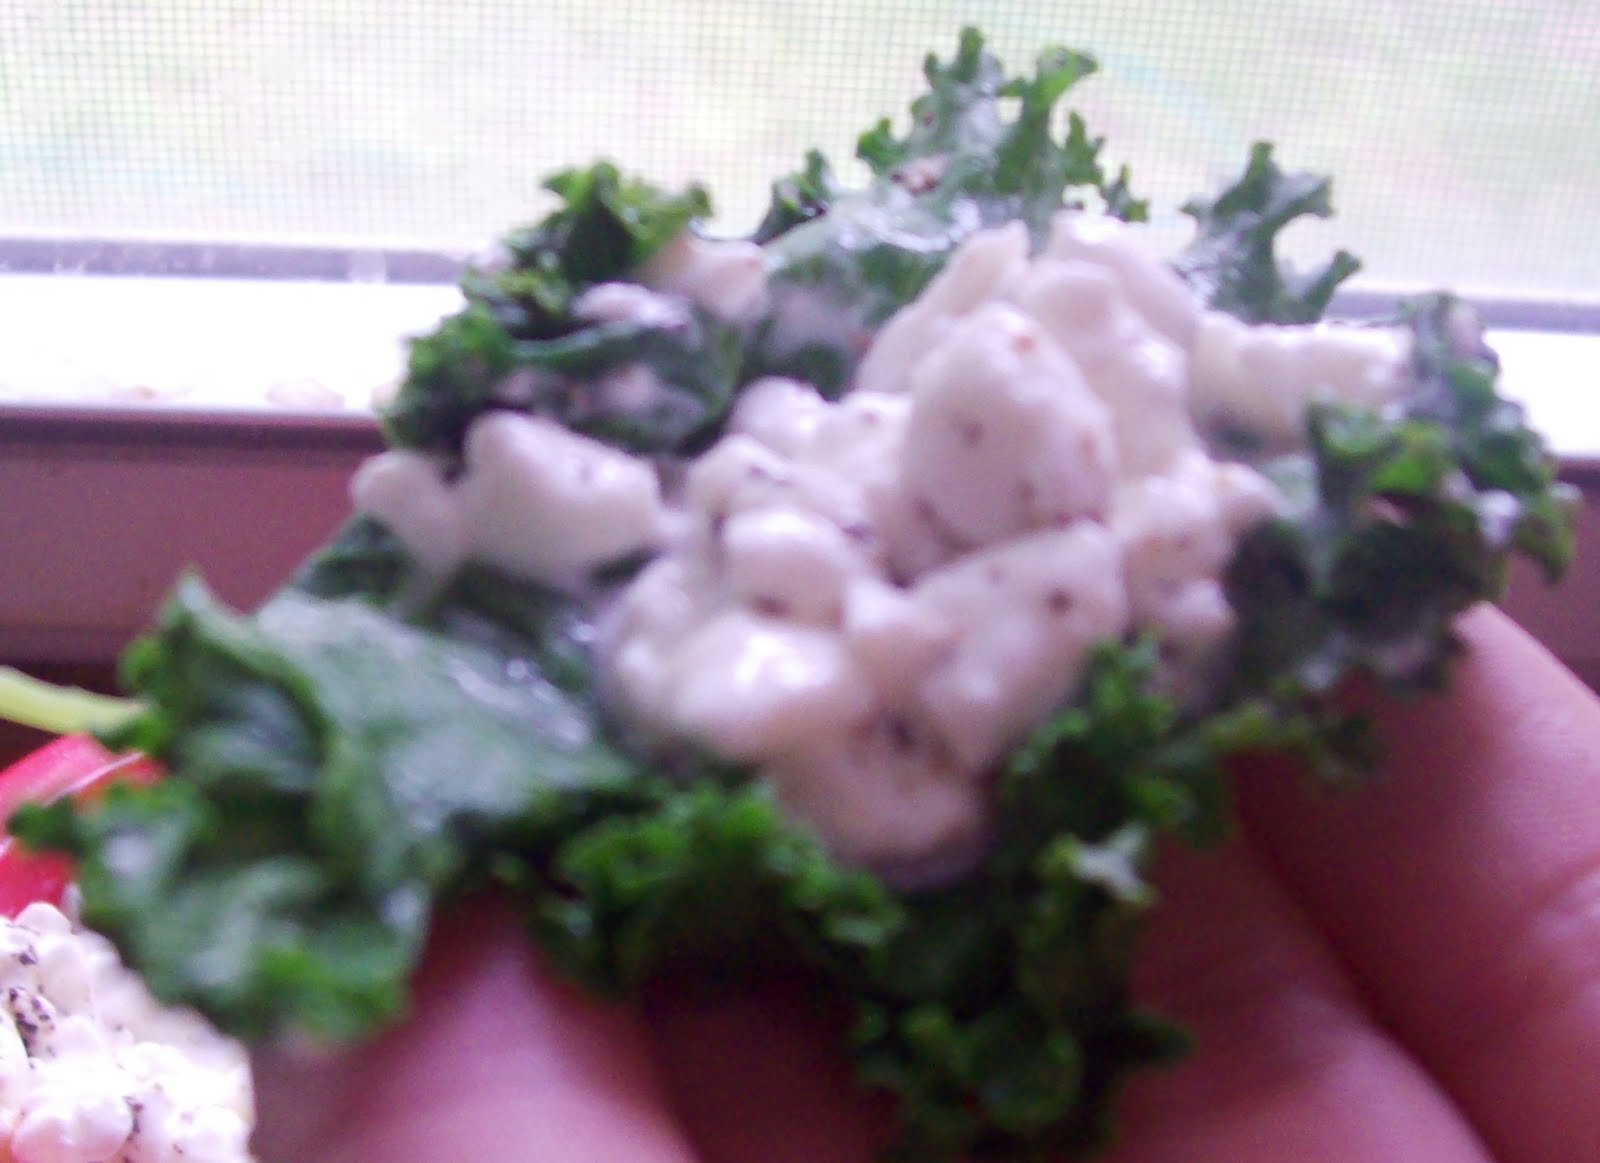 Cottage Cheese Kale Bites The Nutritionist Reviews